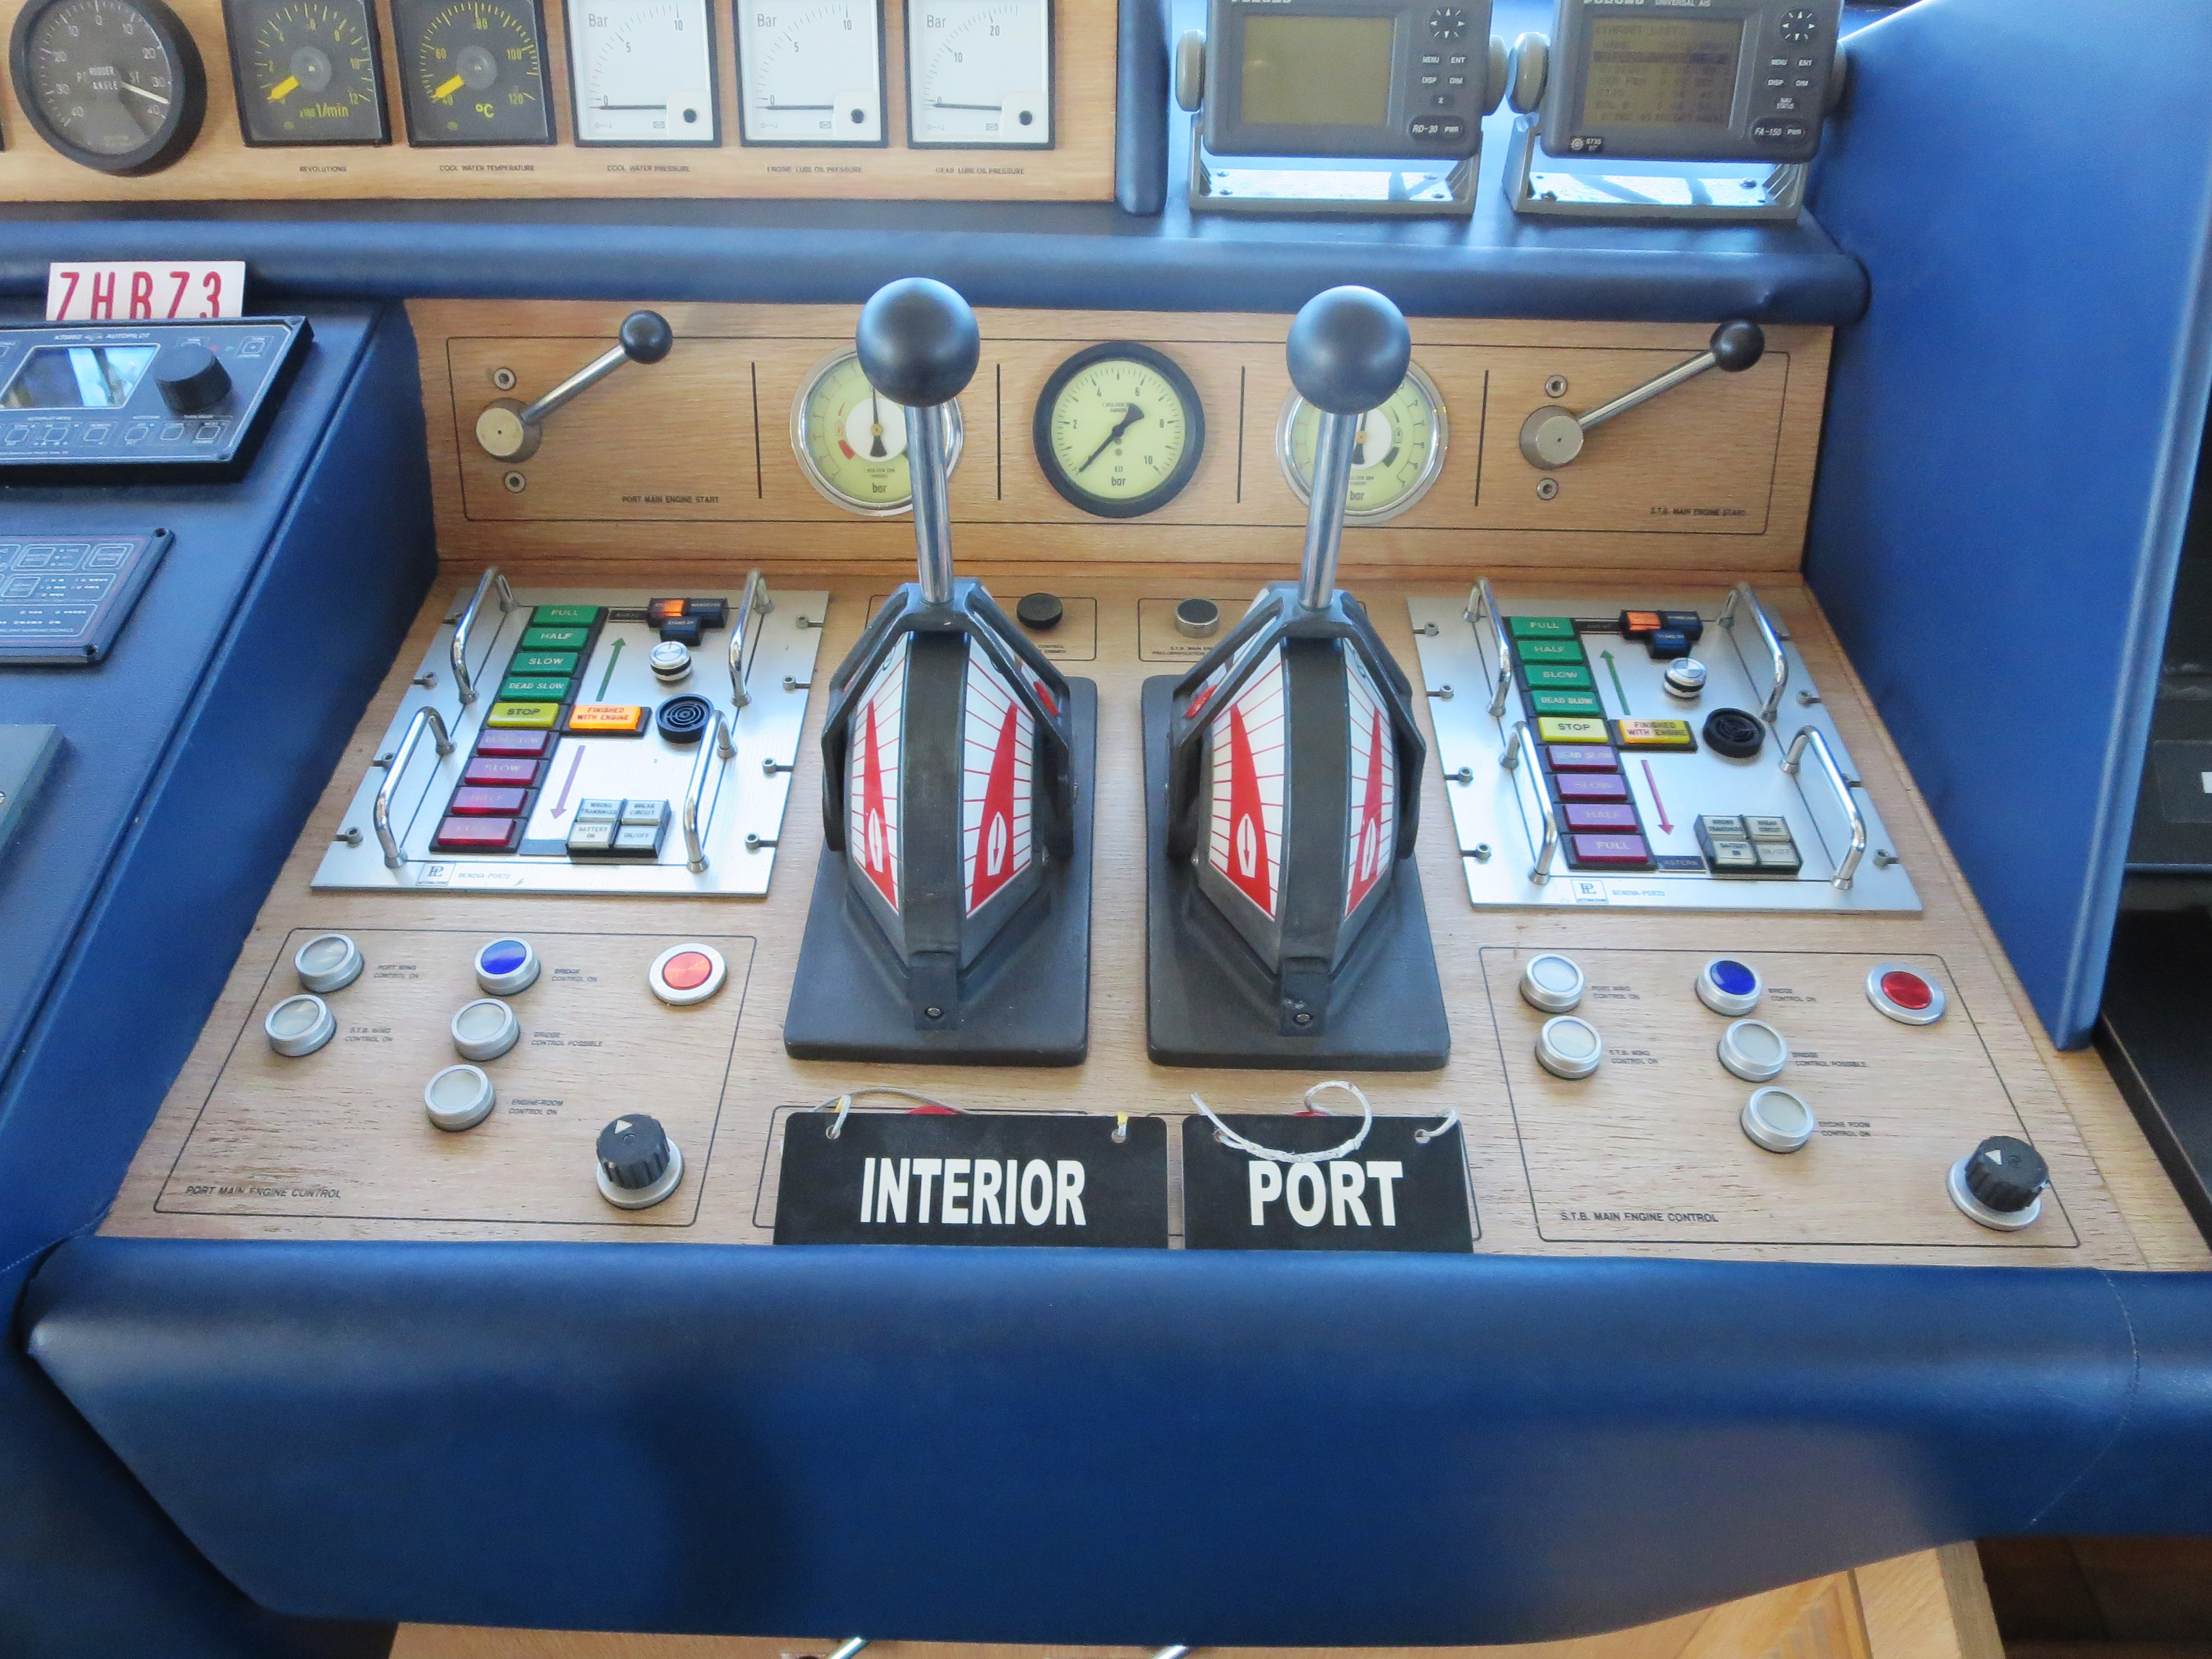 The image shows the refit solution of a megayacht propulsion control system - old bridge panel